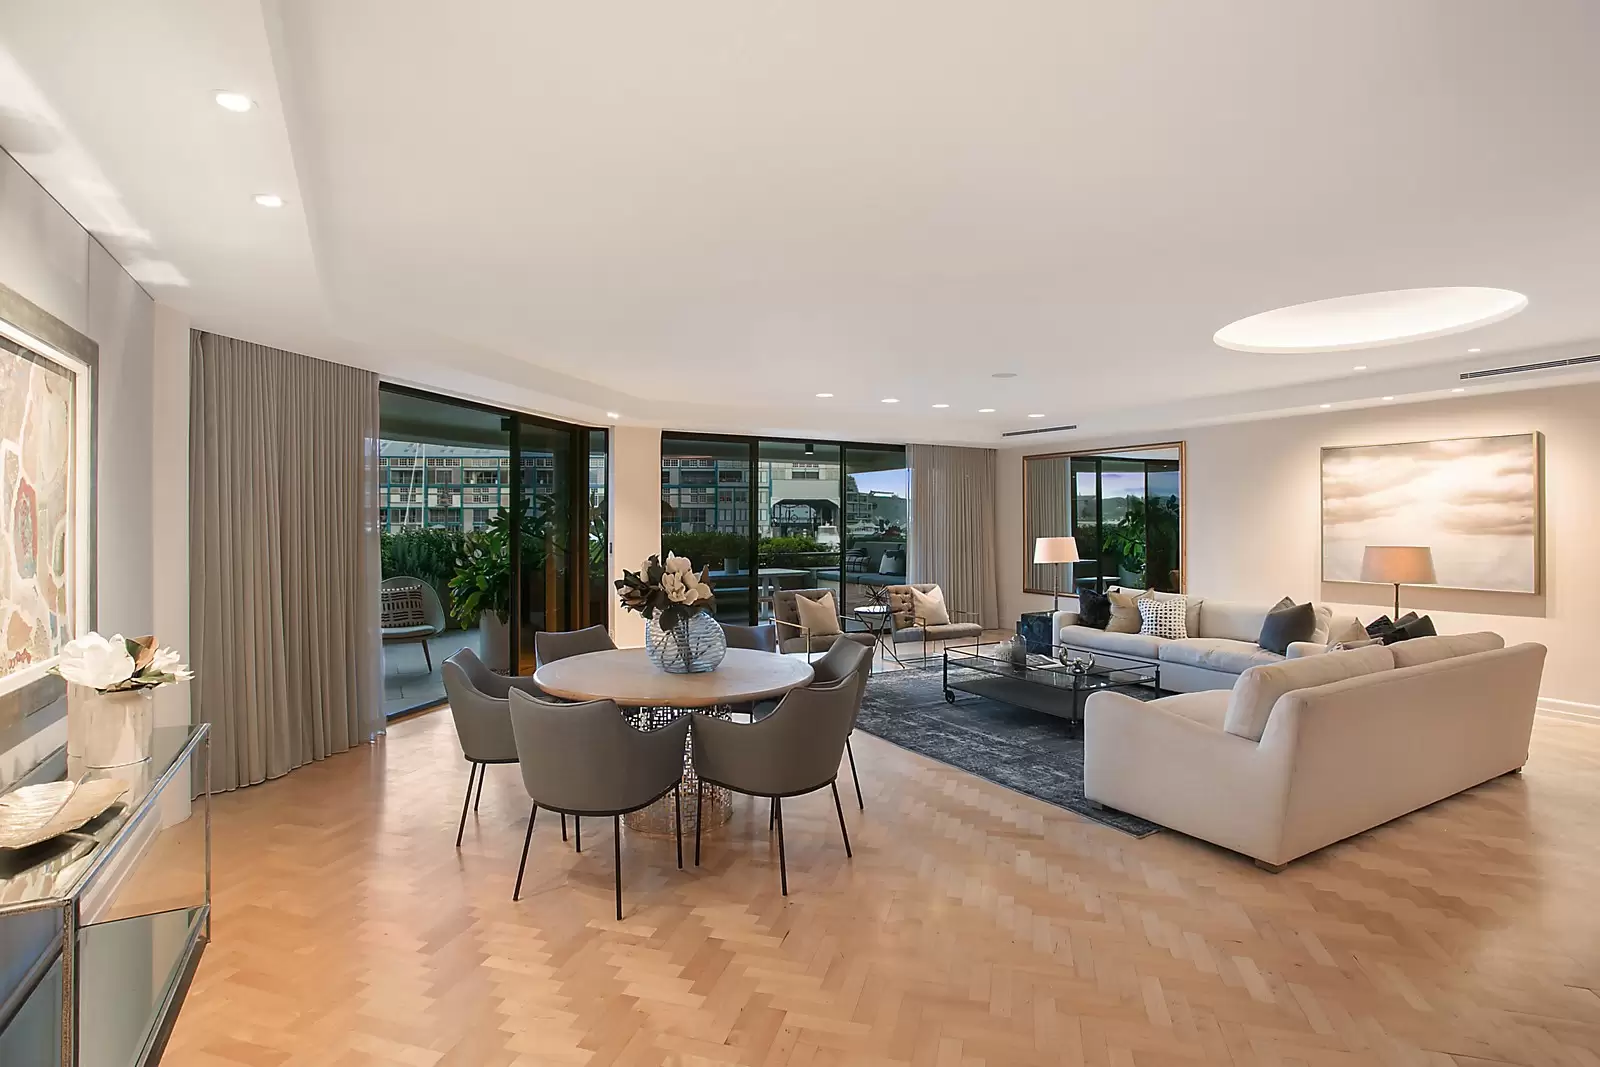 Photo #9: 14/10 Lincoln Crescent, Woolloomooloo - Sold by Sydney Sotheby's International Realty